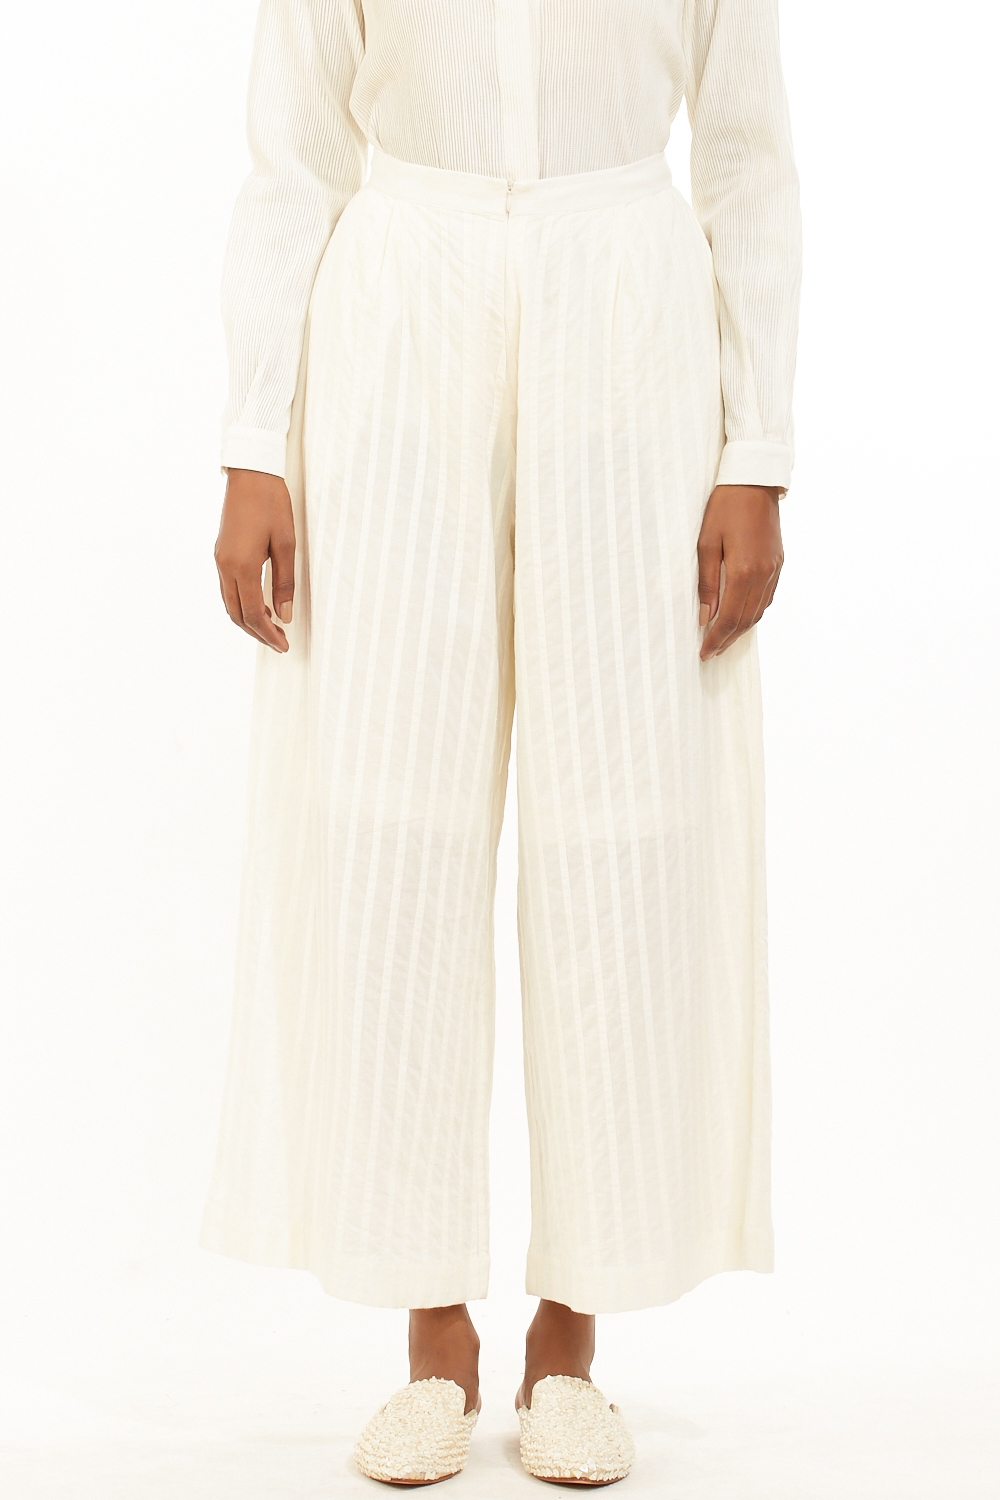 ABRAHAM AND THAKORE | Pleated Cotton Pants